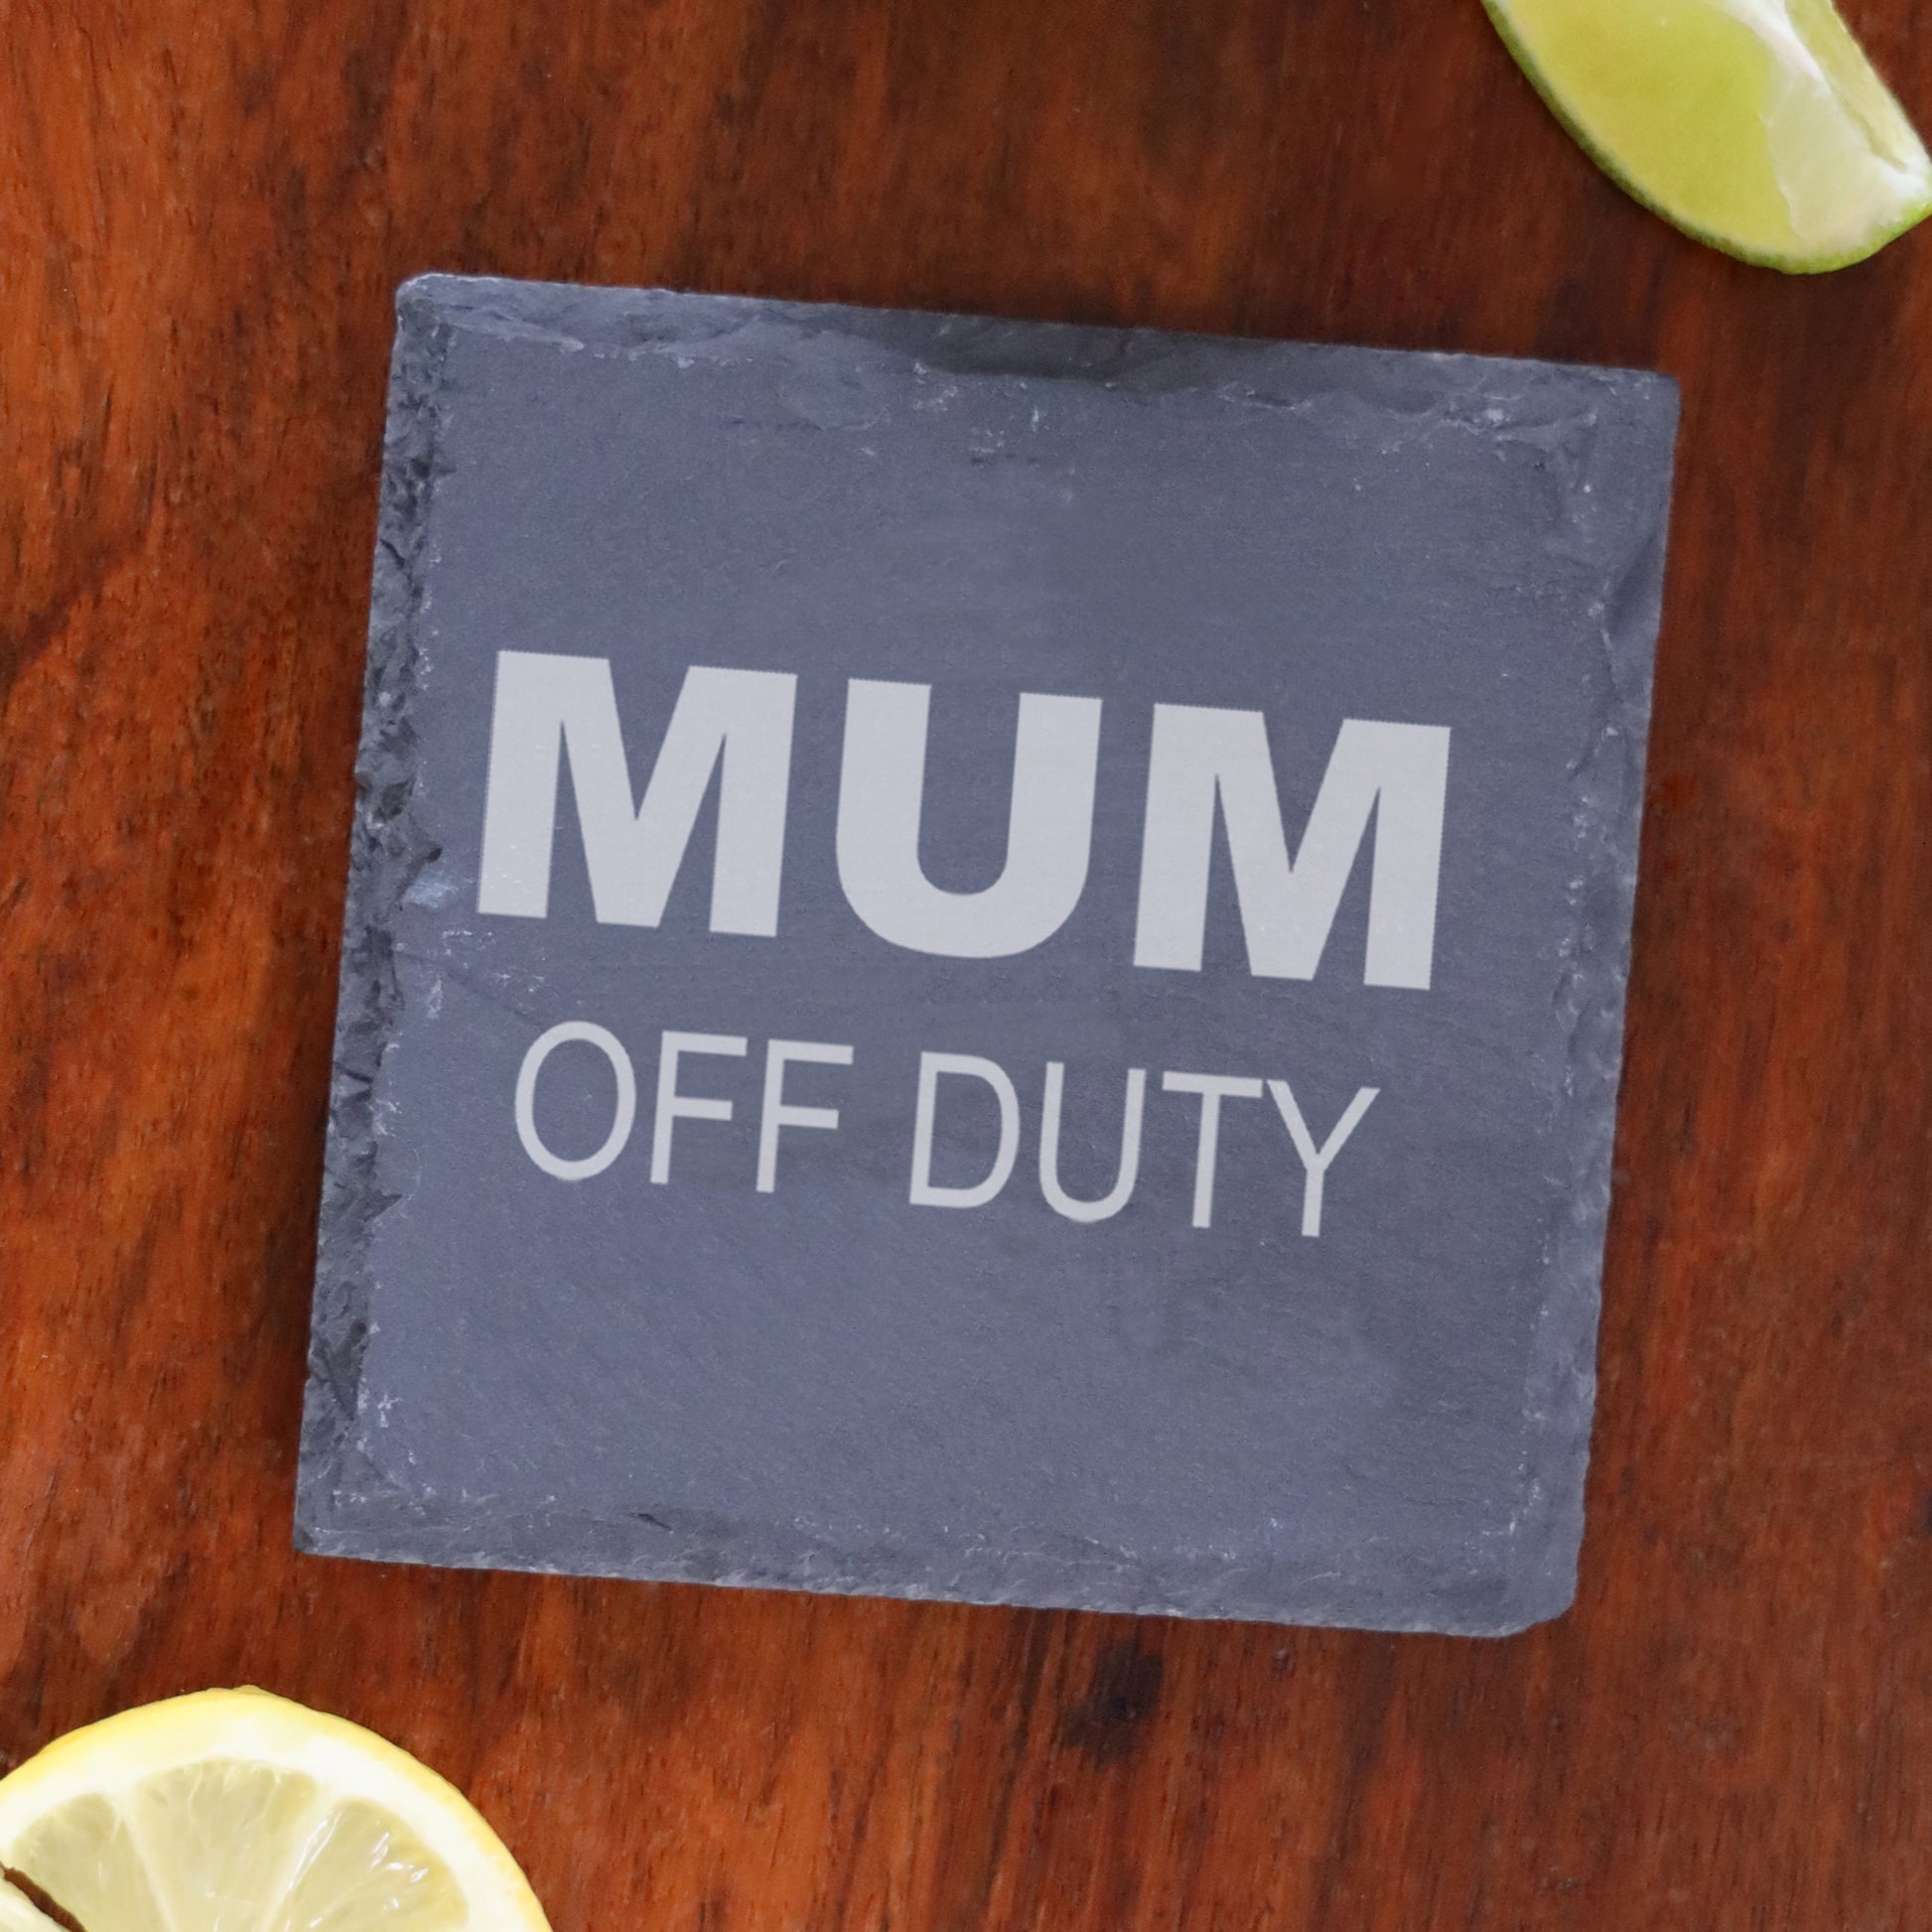 Engraved "Mum Off Duty" Novelty Whisky Glass and/or Coaster Set  - Always Looking Good - Square Coaster Only  